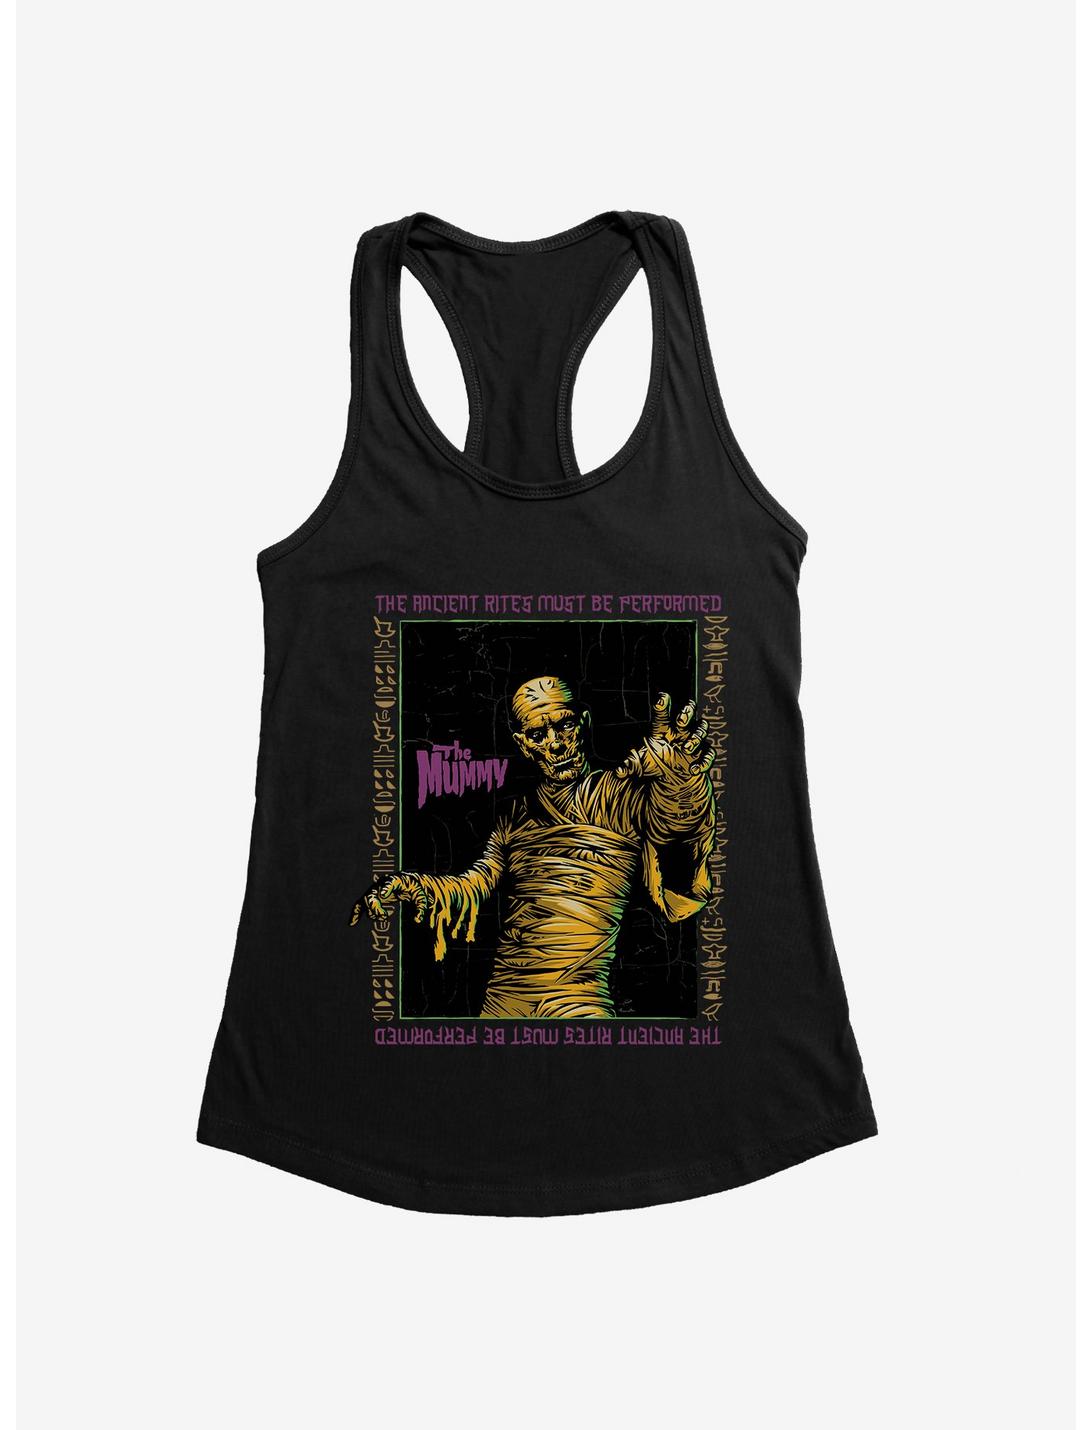 Universal Monsters The Mummy Ancient Rites Must Be Performed Girls Tank, BLACK, hi-res